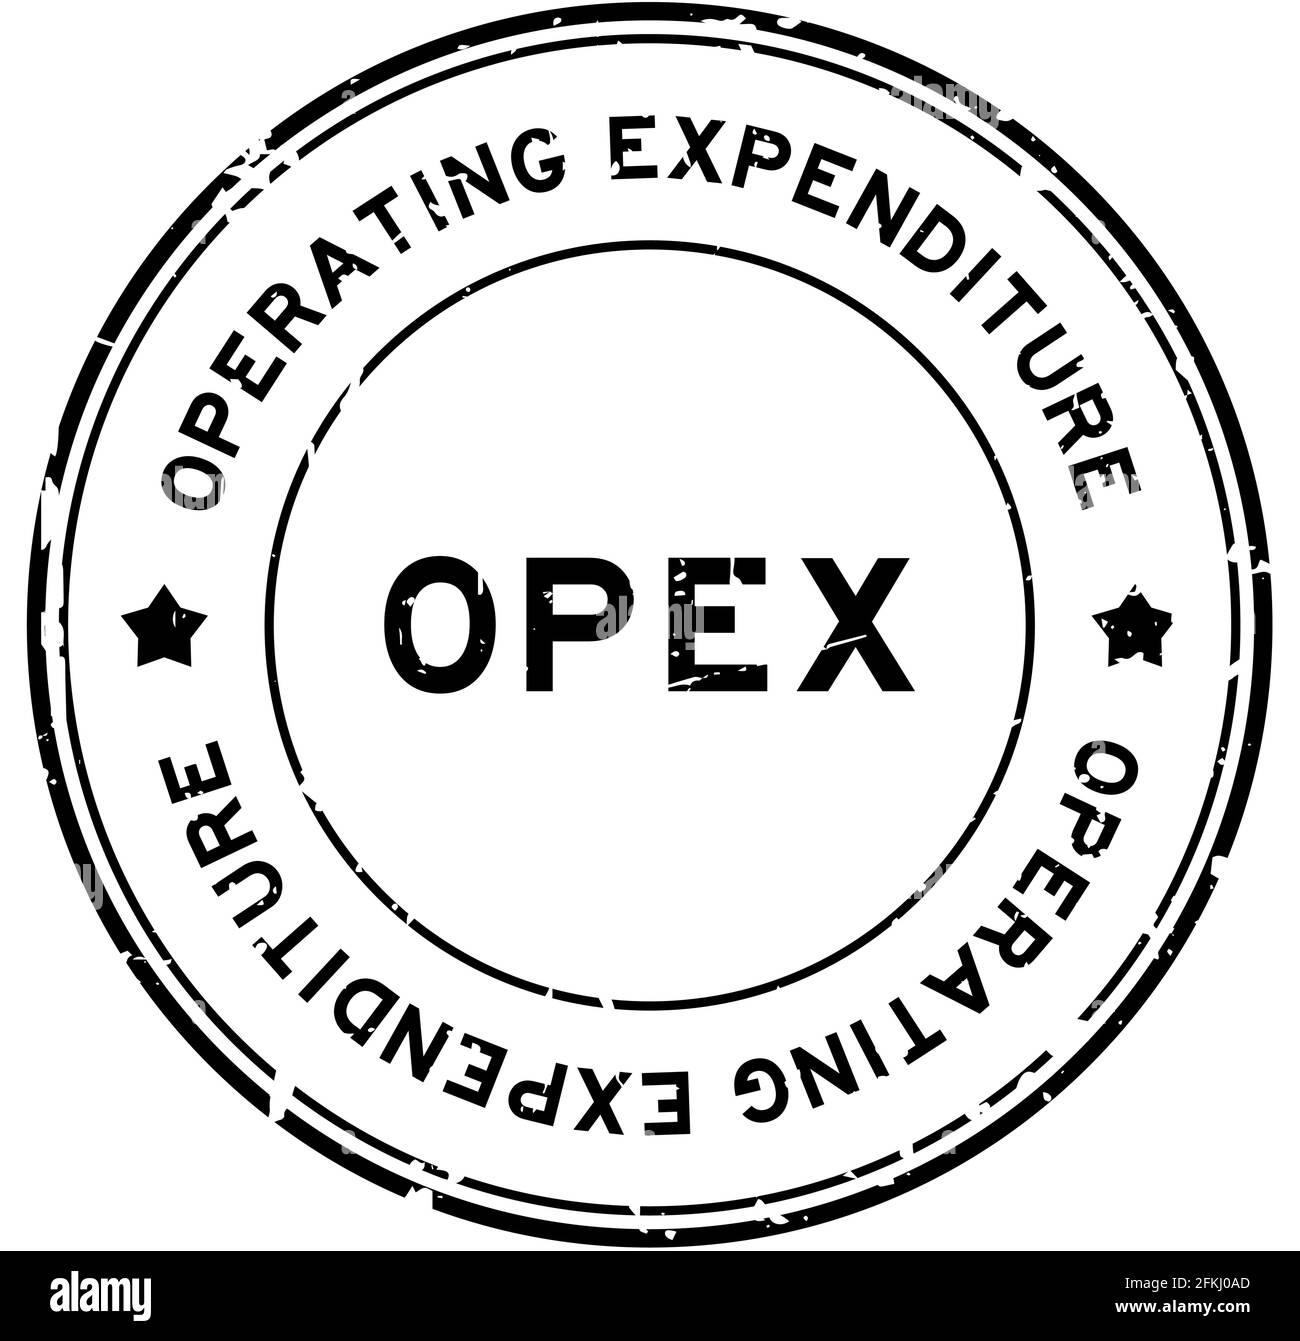 Grunge black OPEX operating expendiure word round rubber seal stamp on white background Stock Vector